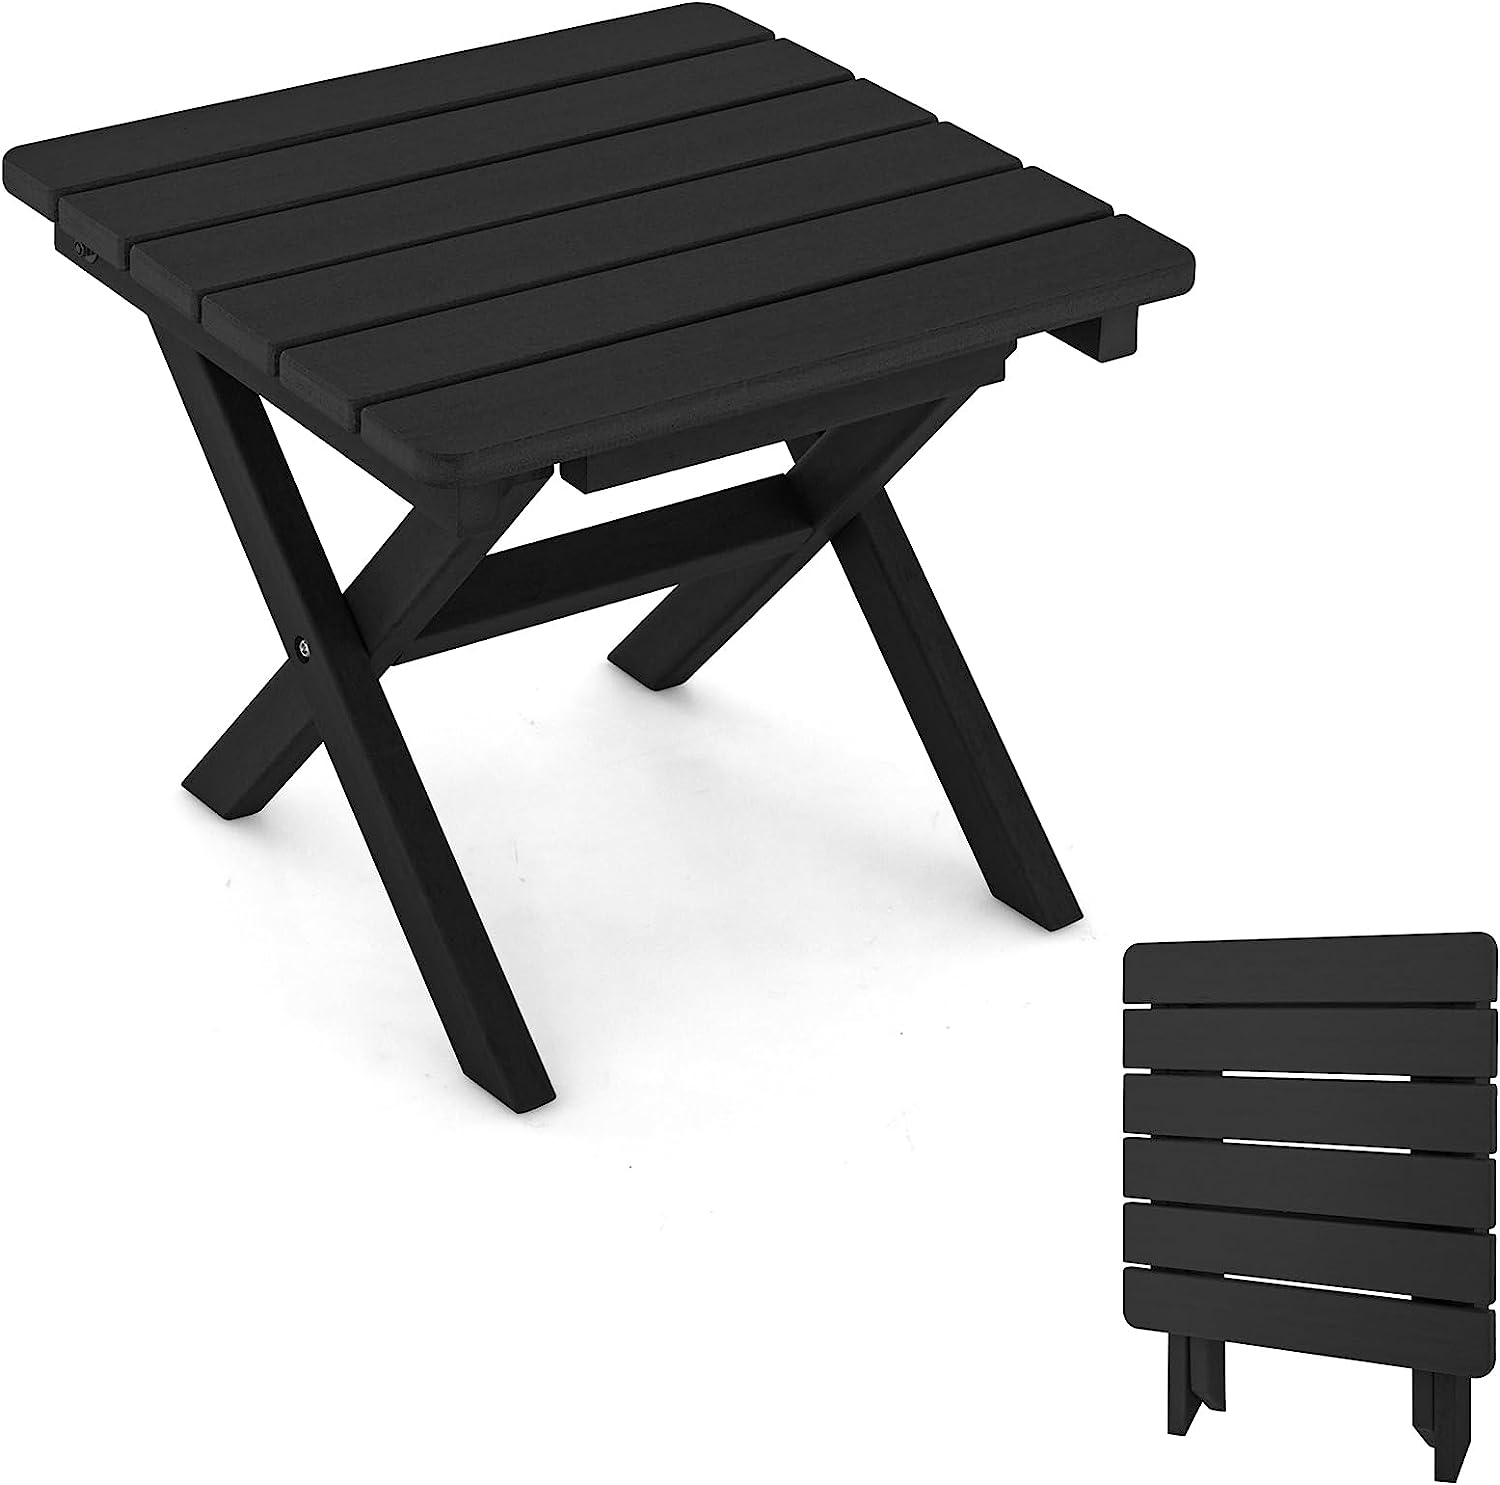 Giantex Outdoor Folding Side Table - Foldable Weather-Resistant HDPE Adirondack Table